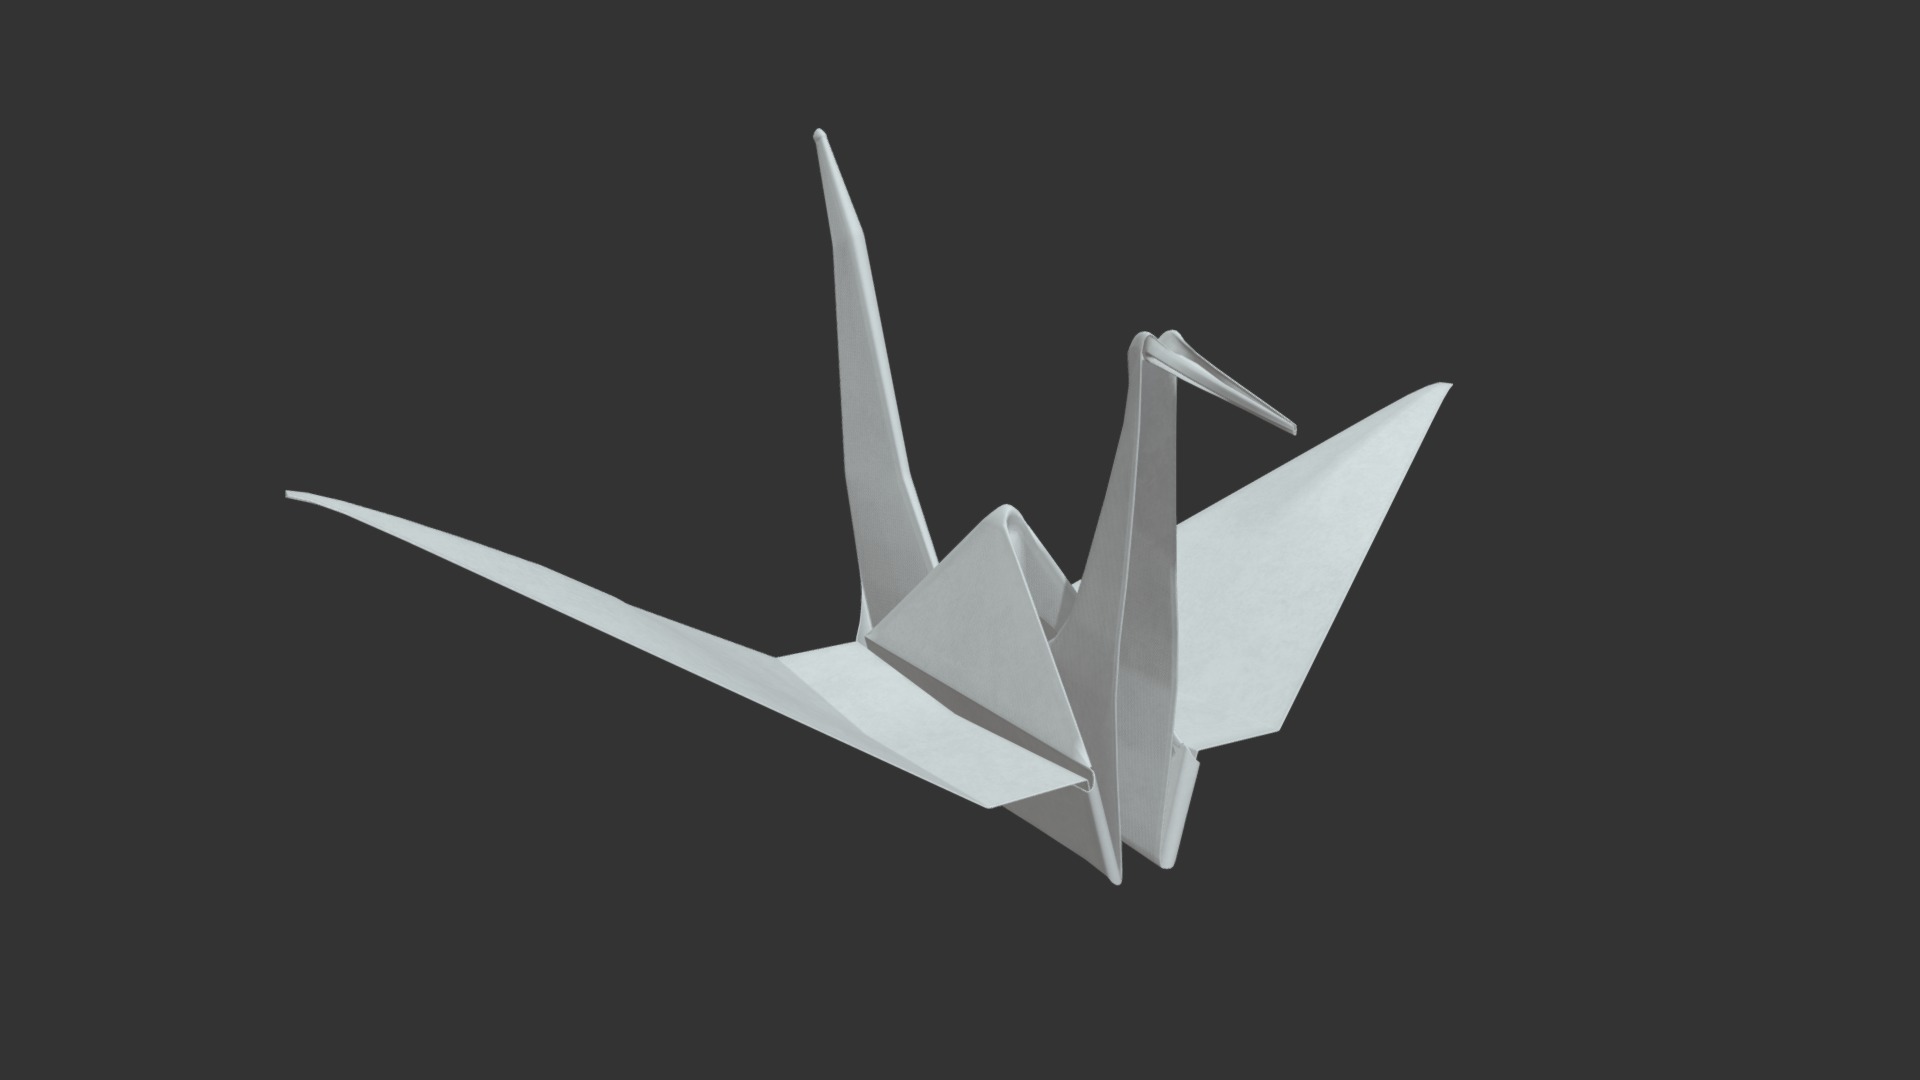 3D model Paper origami crane - This is a 3D model of the Paper origami crane. The 3D model is about a paper airplane on a black background.